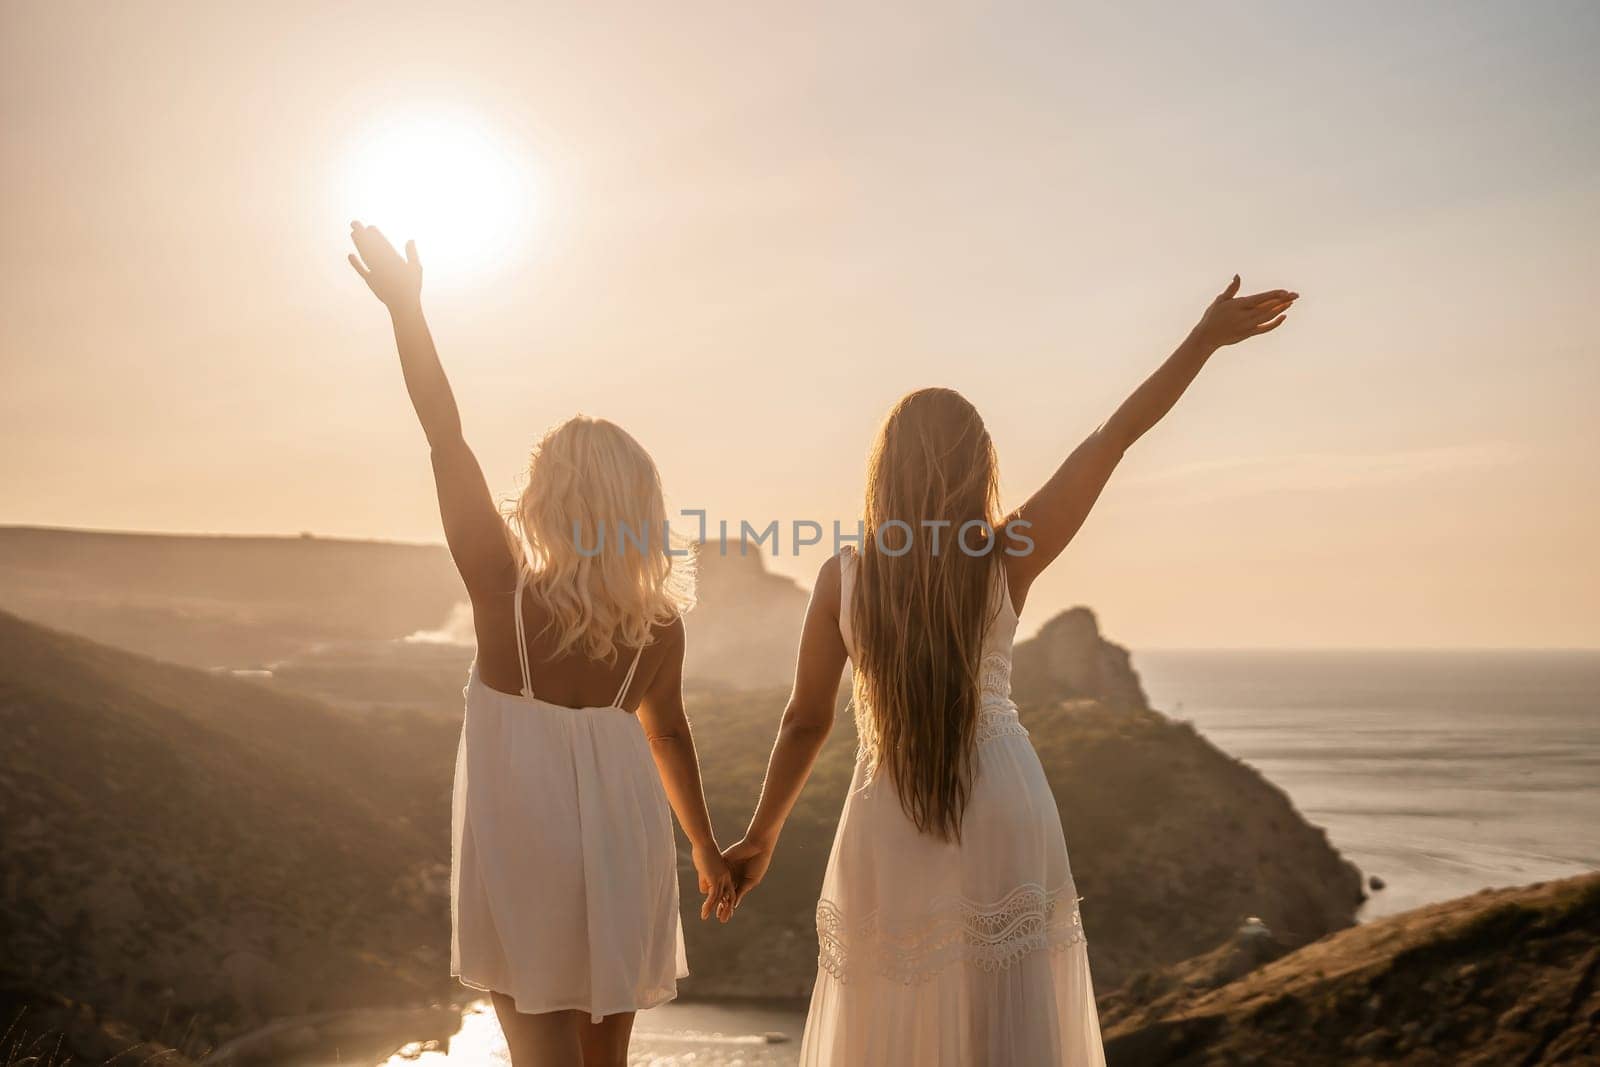 Two women are standing on a hill overlooking the ocean. They are holding hands and looking out at the water. The scene is peaceful and serene, with the sun shining brightly in the background. by Matiunina